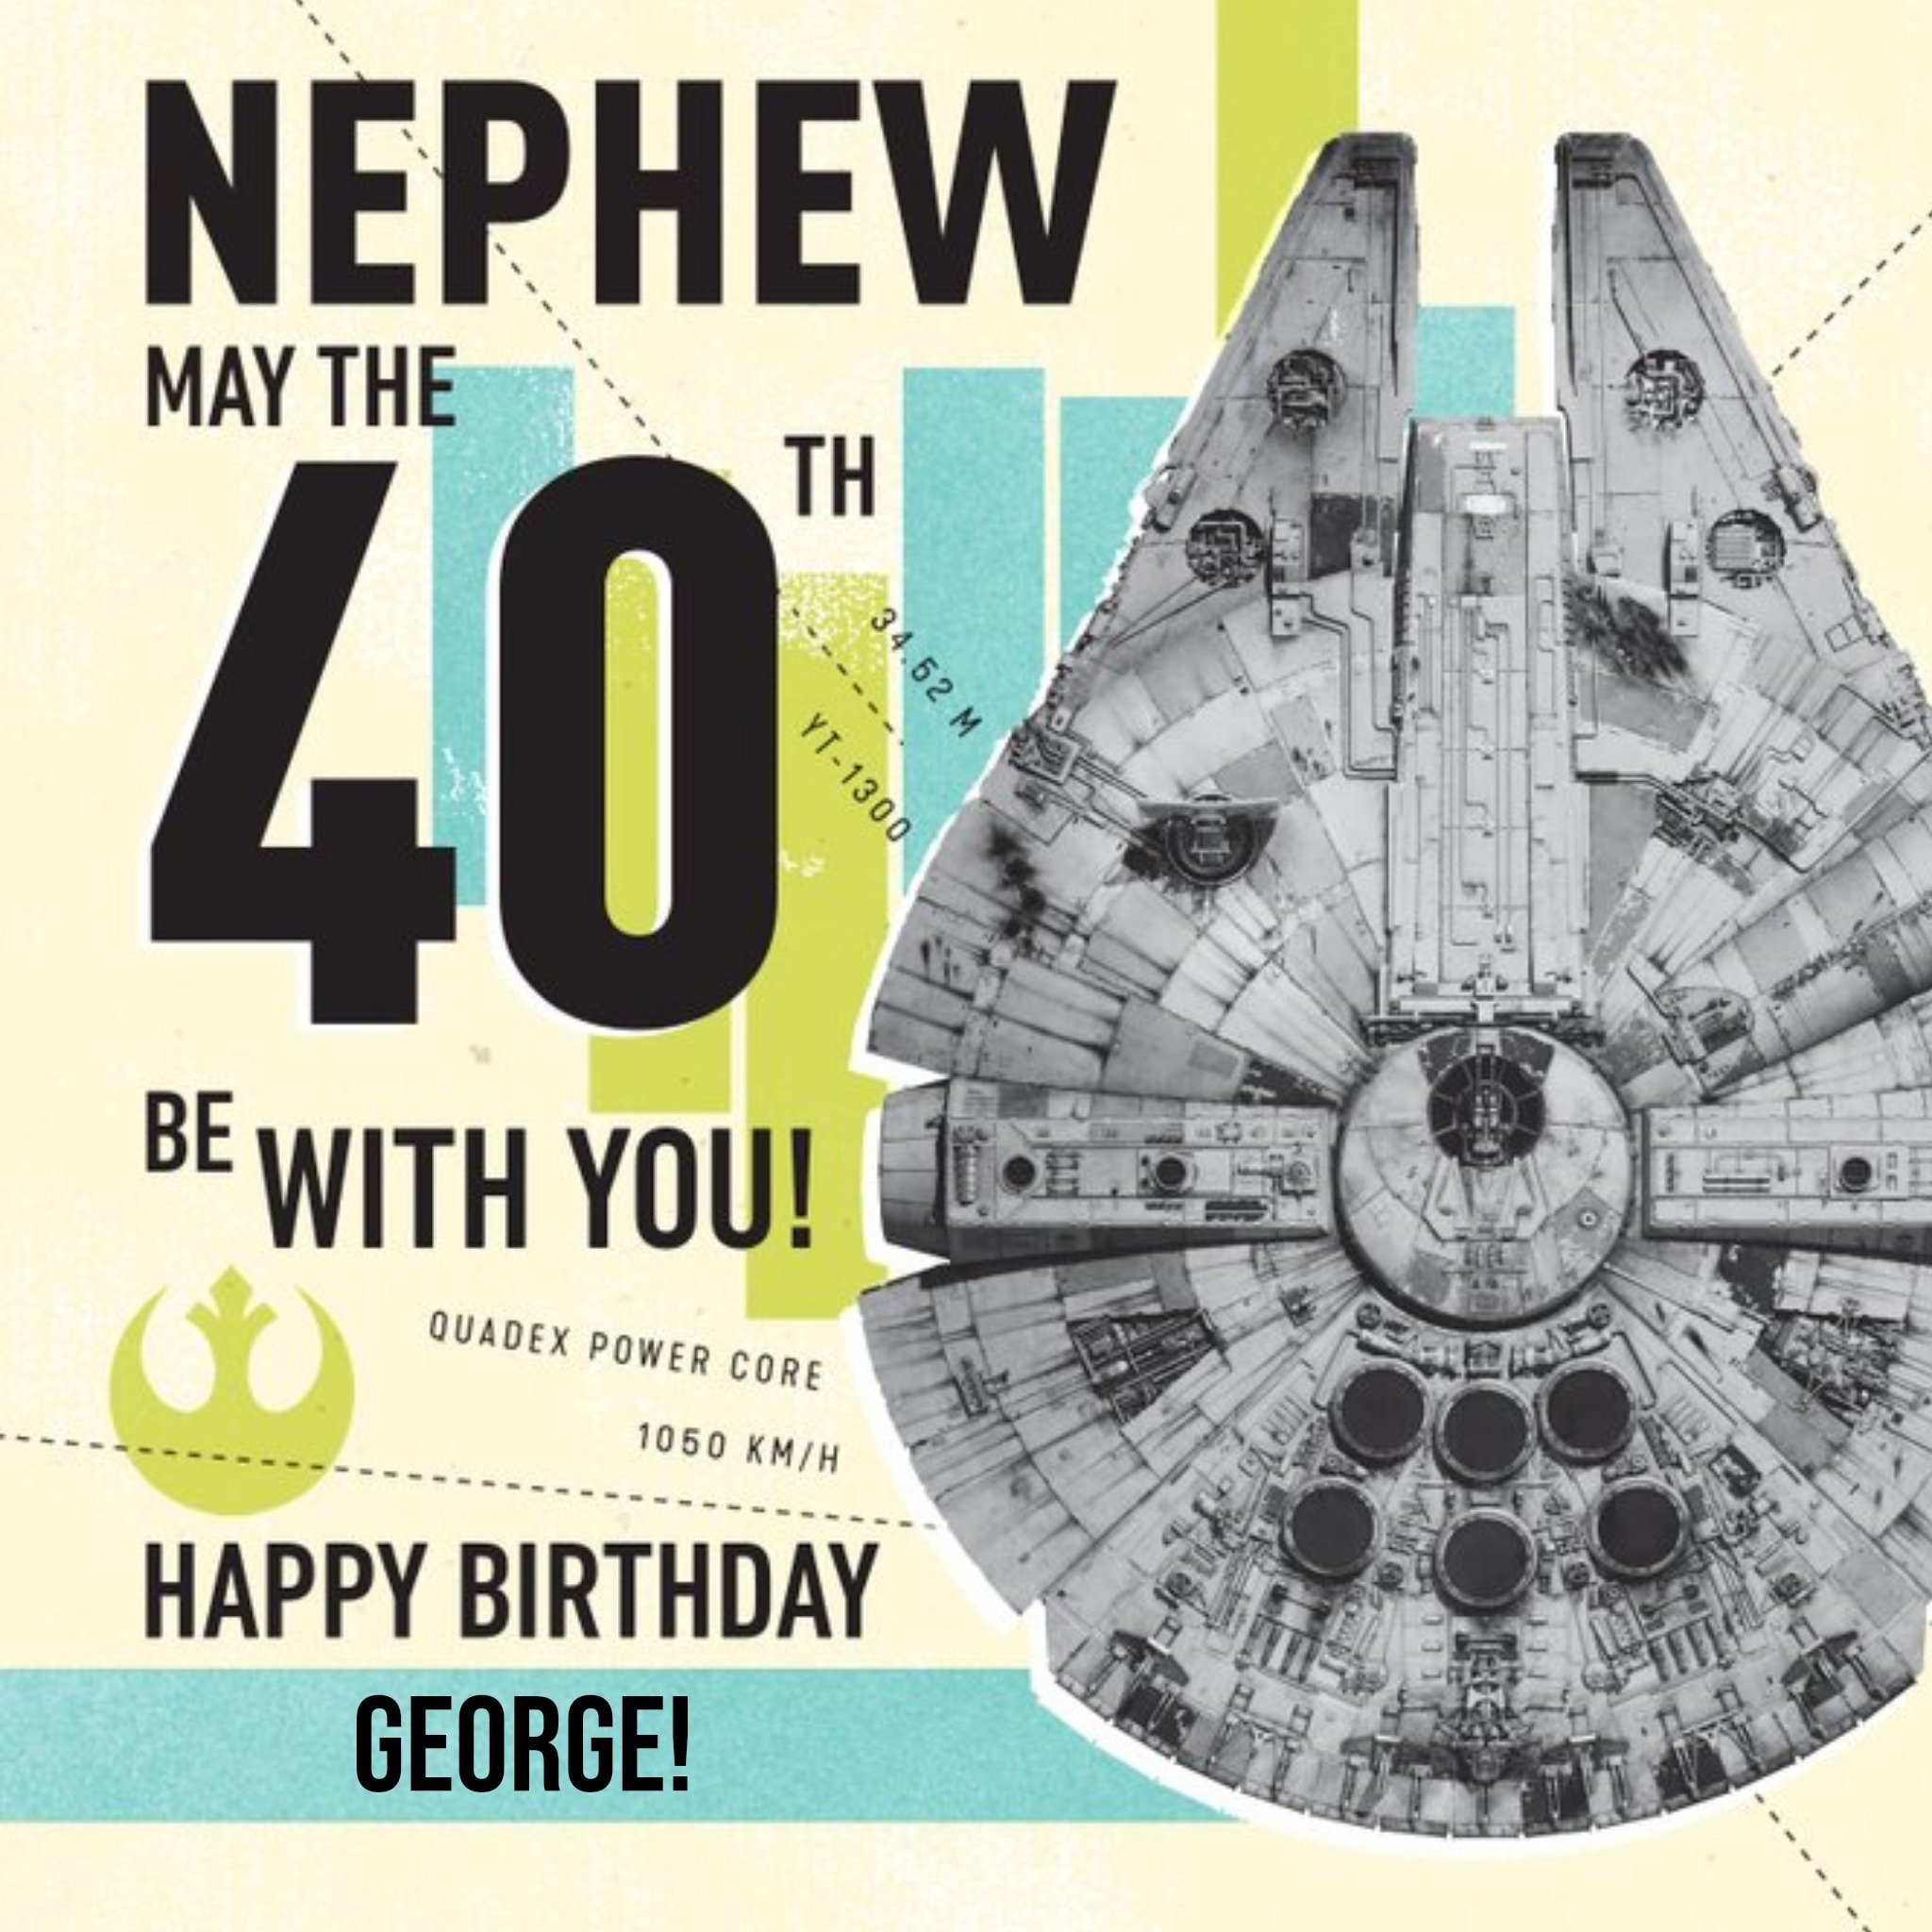 Disney Star Wars Millennium Falcon May the 40th Be With You Birthday Card For Nephew, Square